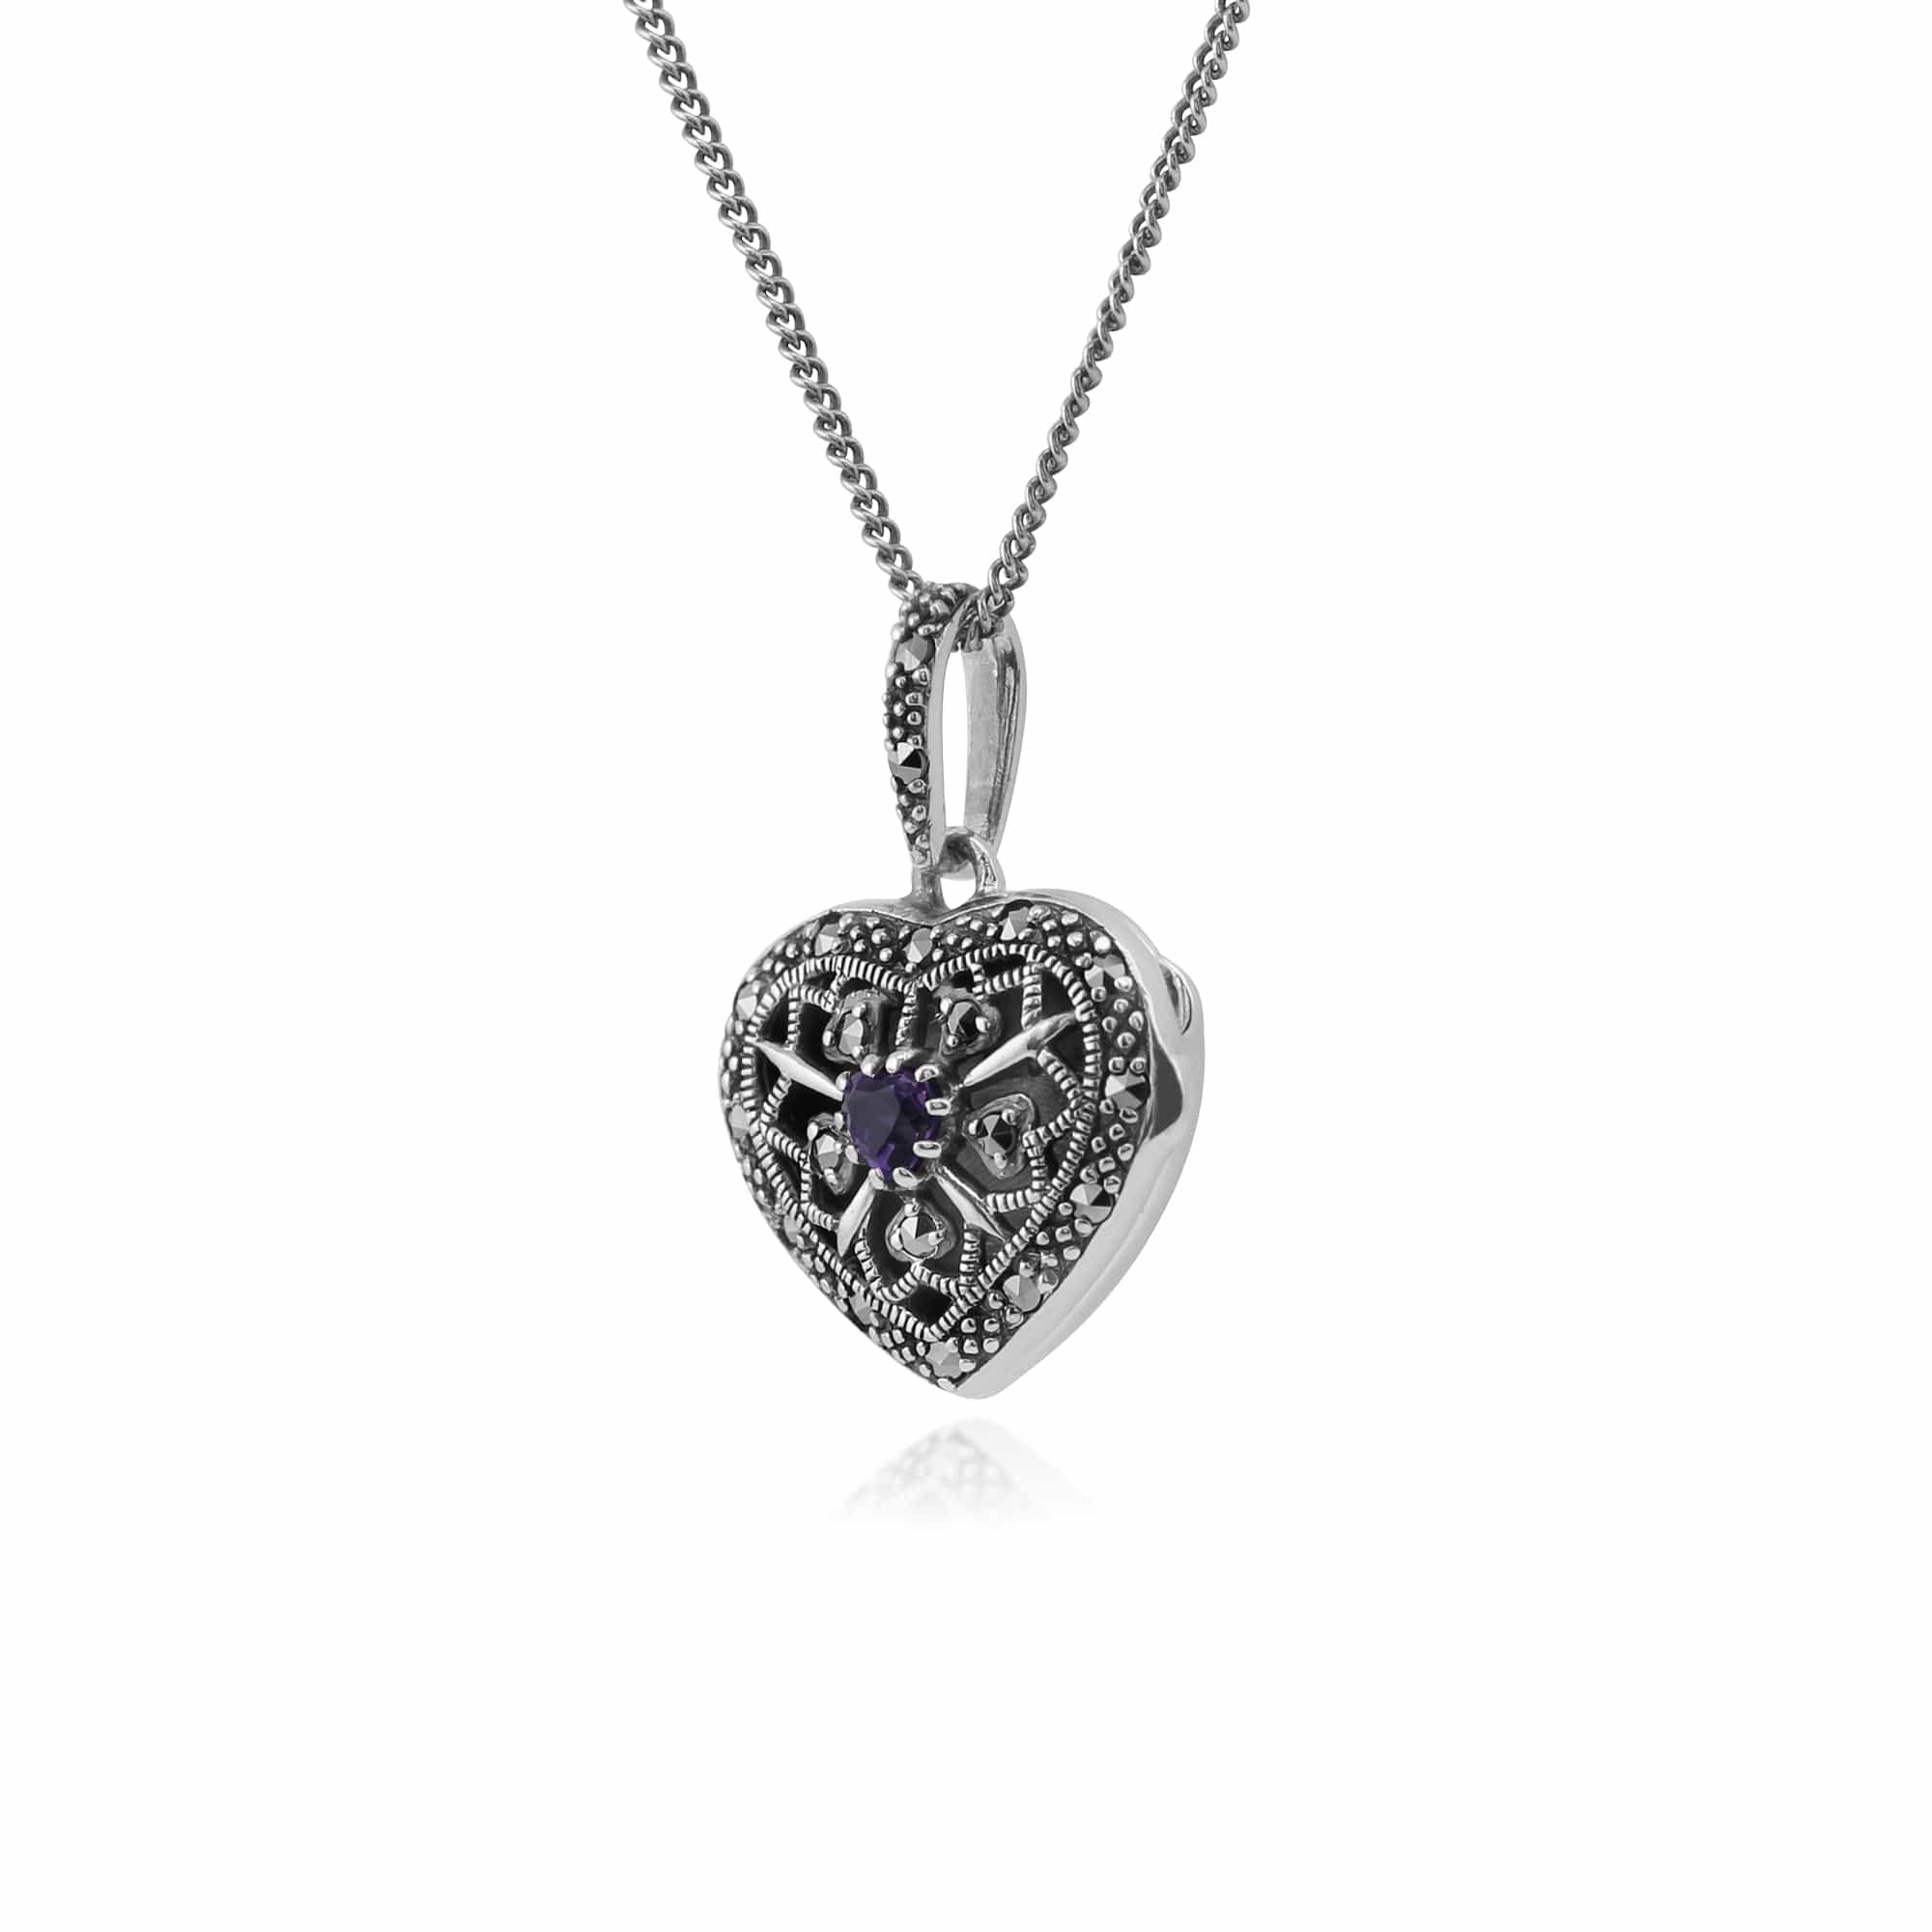 214N461905925 Art Nouveau Style Round Amethyst & Marcasite Heart Necklace in 925 Sterling Silver 2